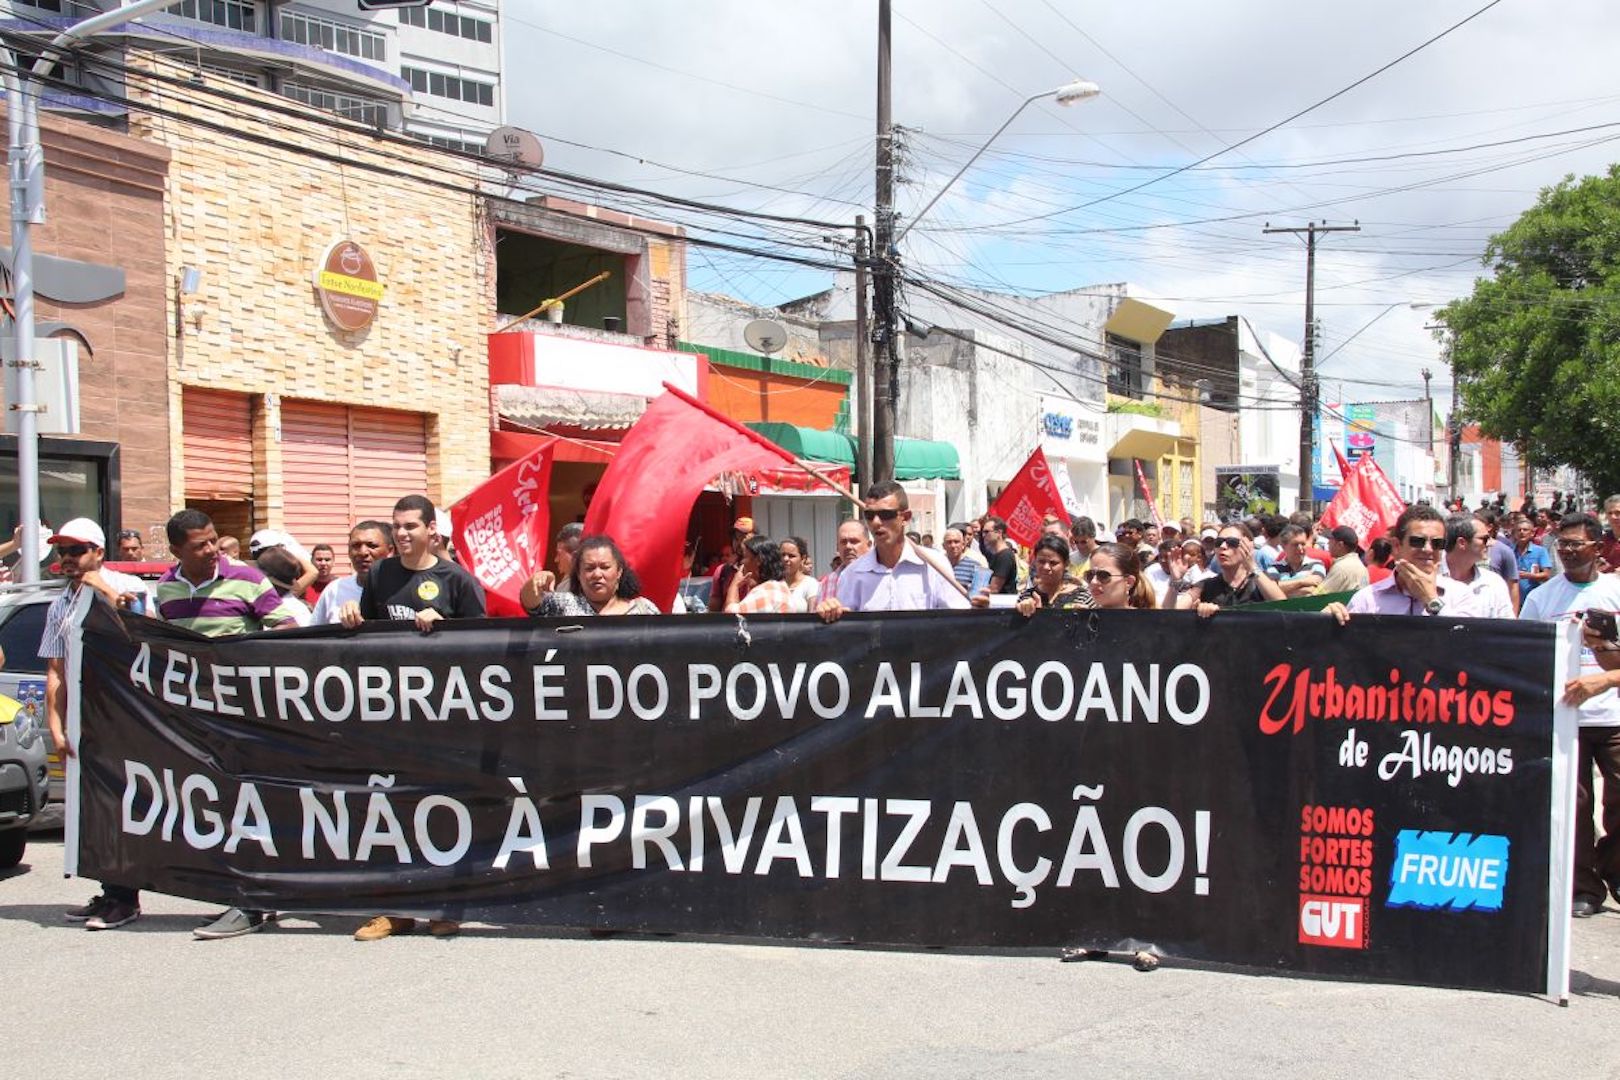 Brazil,Protests against the privatization of state-owned Eletrobras in Alagoas state,